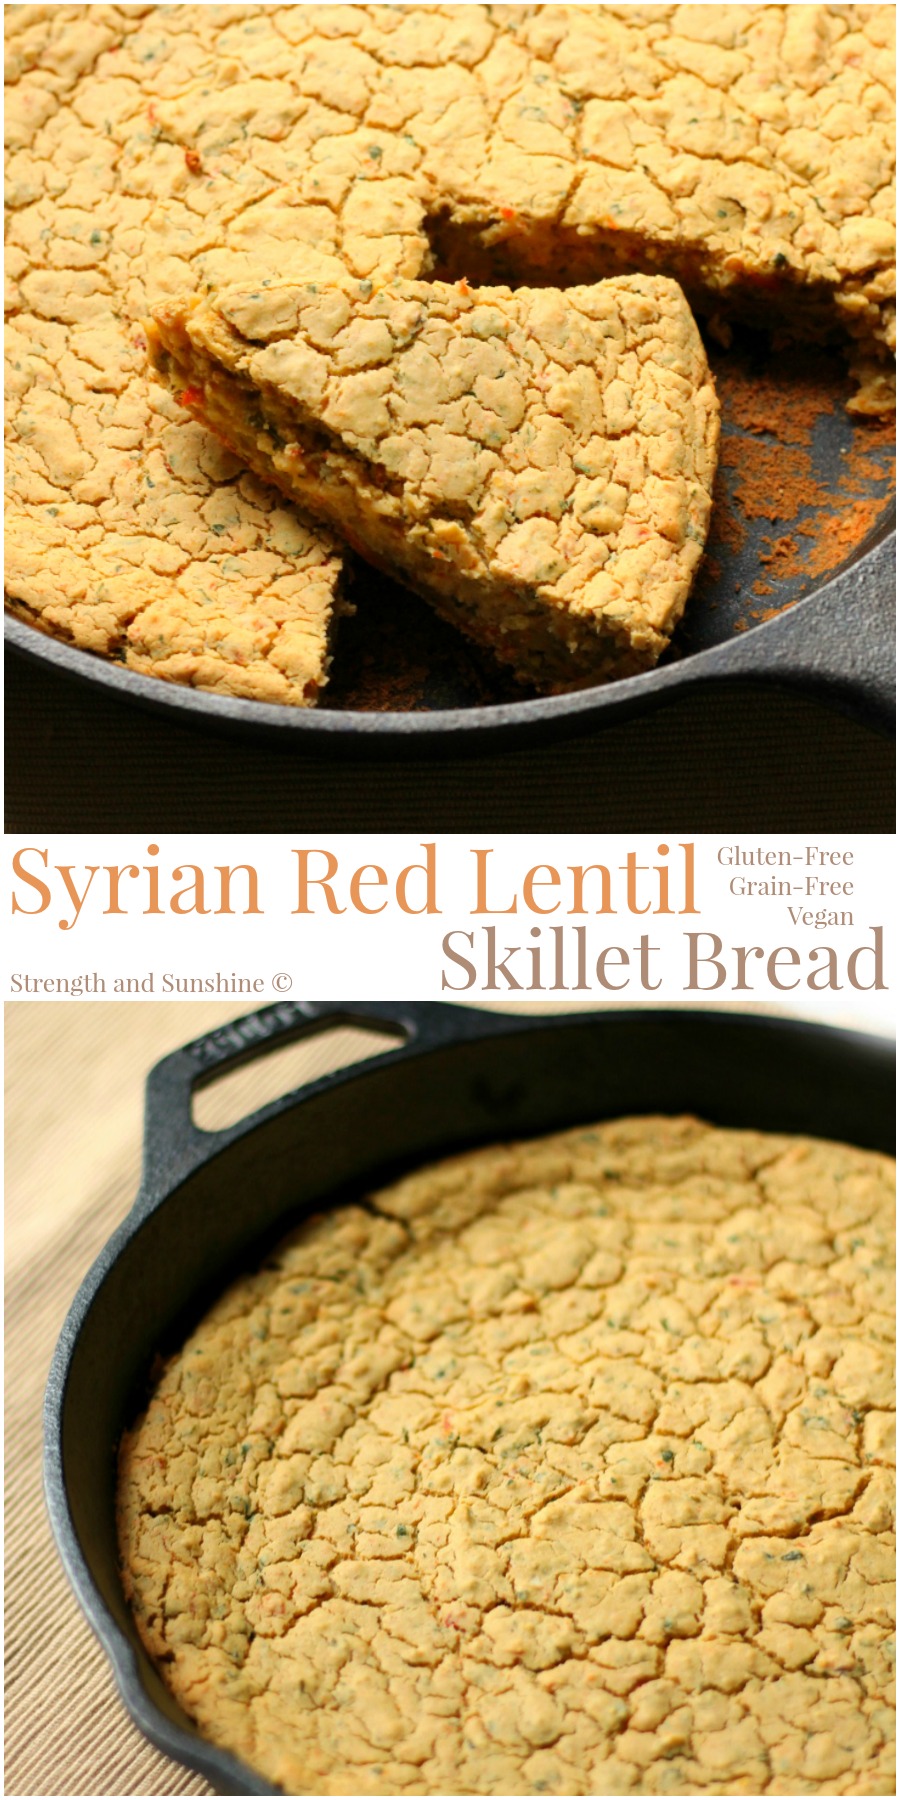 Syrian Red Lentil Skillet Bread | Strength and Sunshine @RebeccaGF666 A Syrian-inspired red lentil skillet bread, bursting with flavorful spices, herbs, and roasted red pepper. Gluten-free, grain-free, and vegan, this easy lentil skillet bread will wow your guests and make dinner memorable.